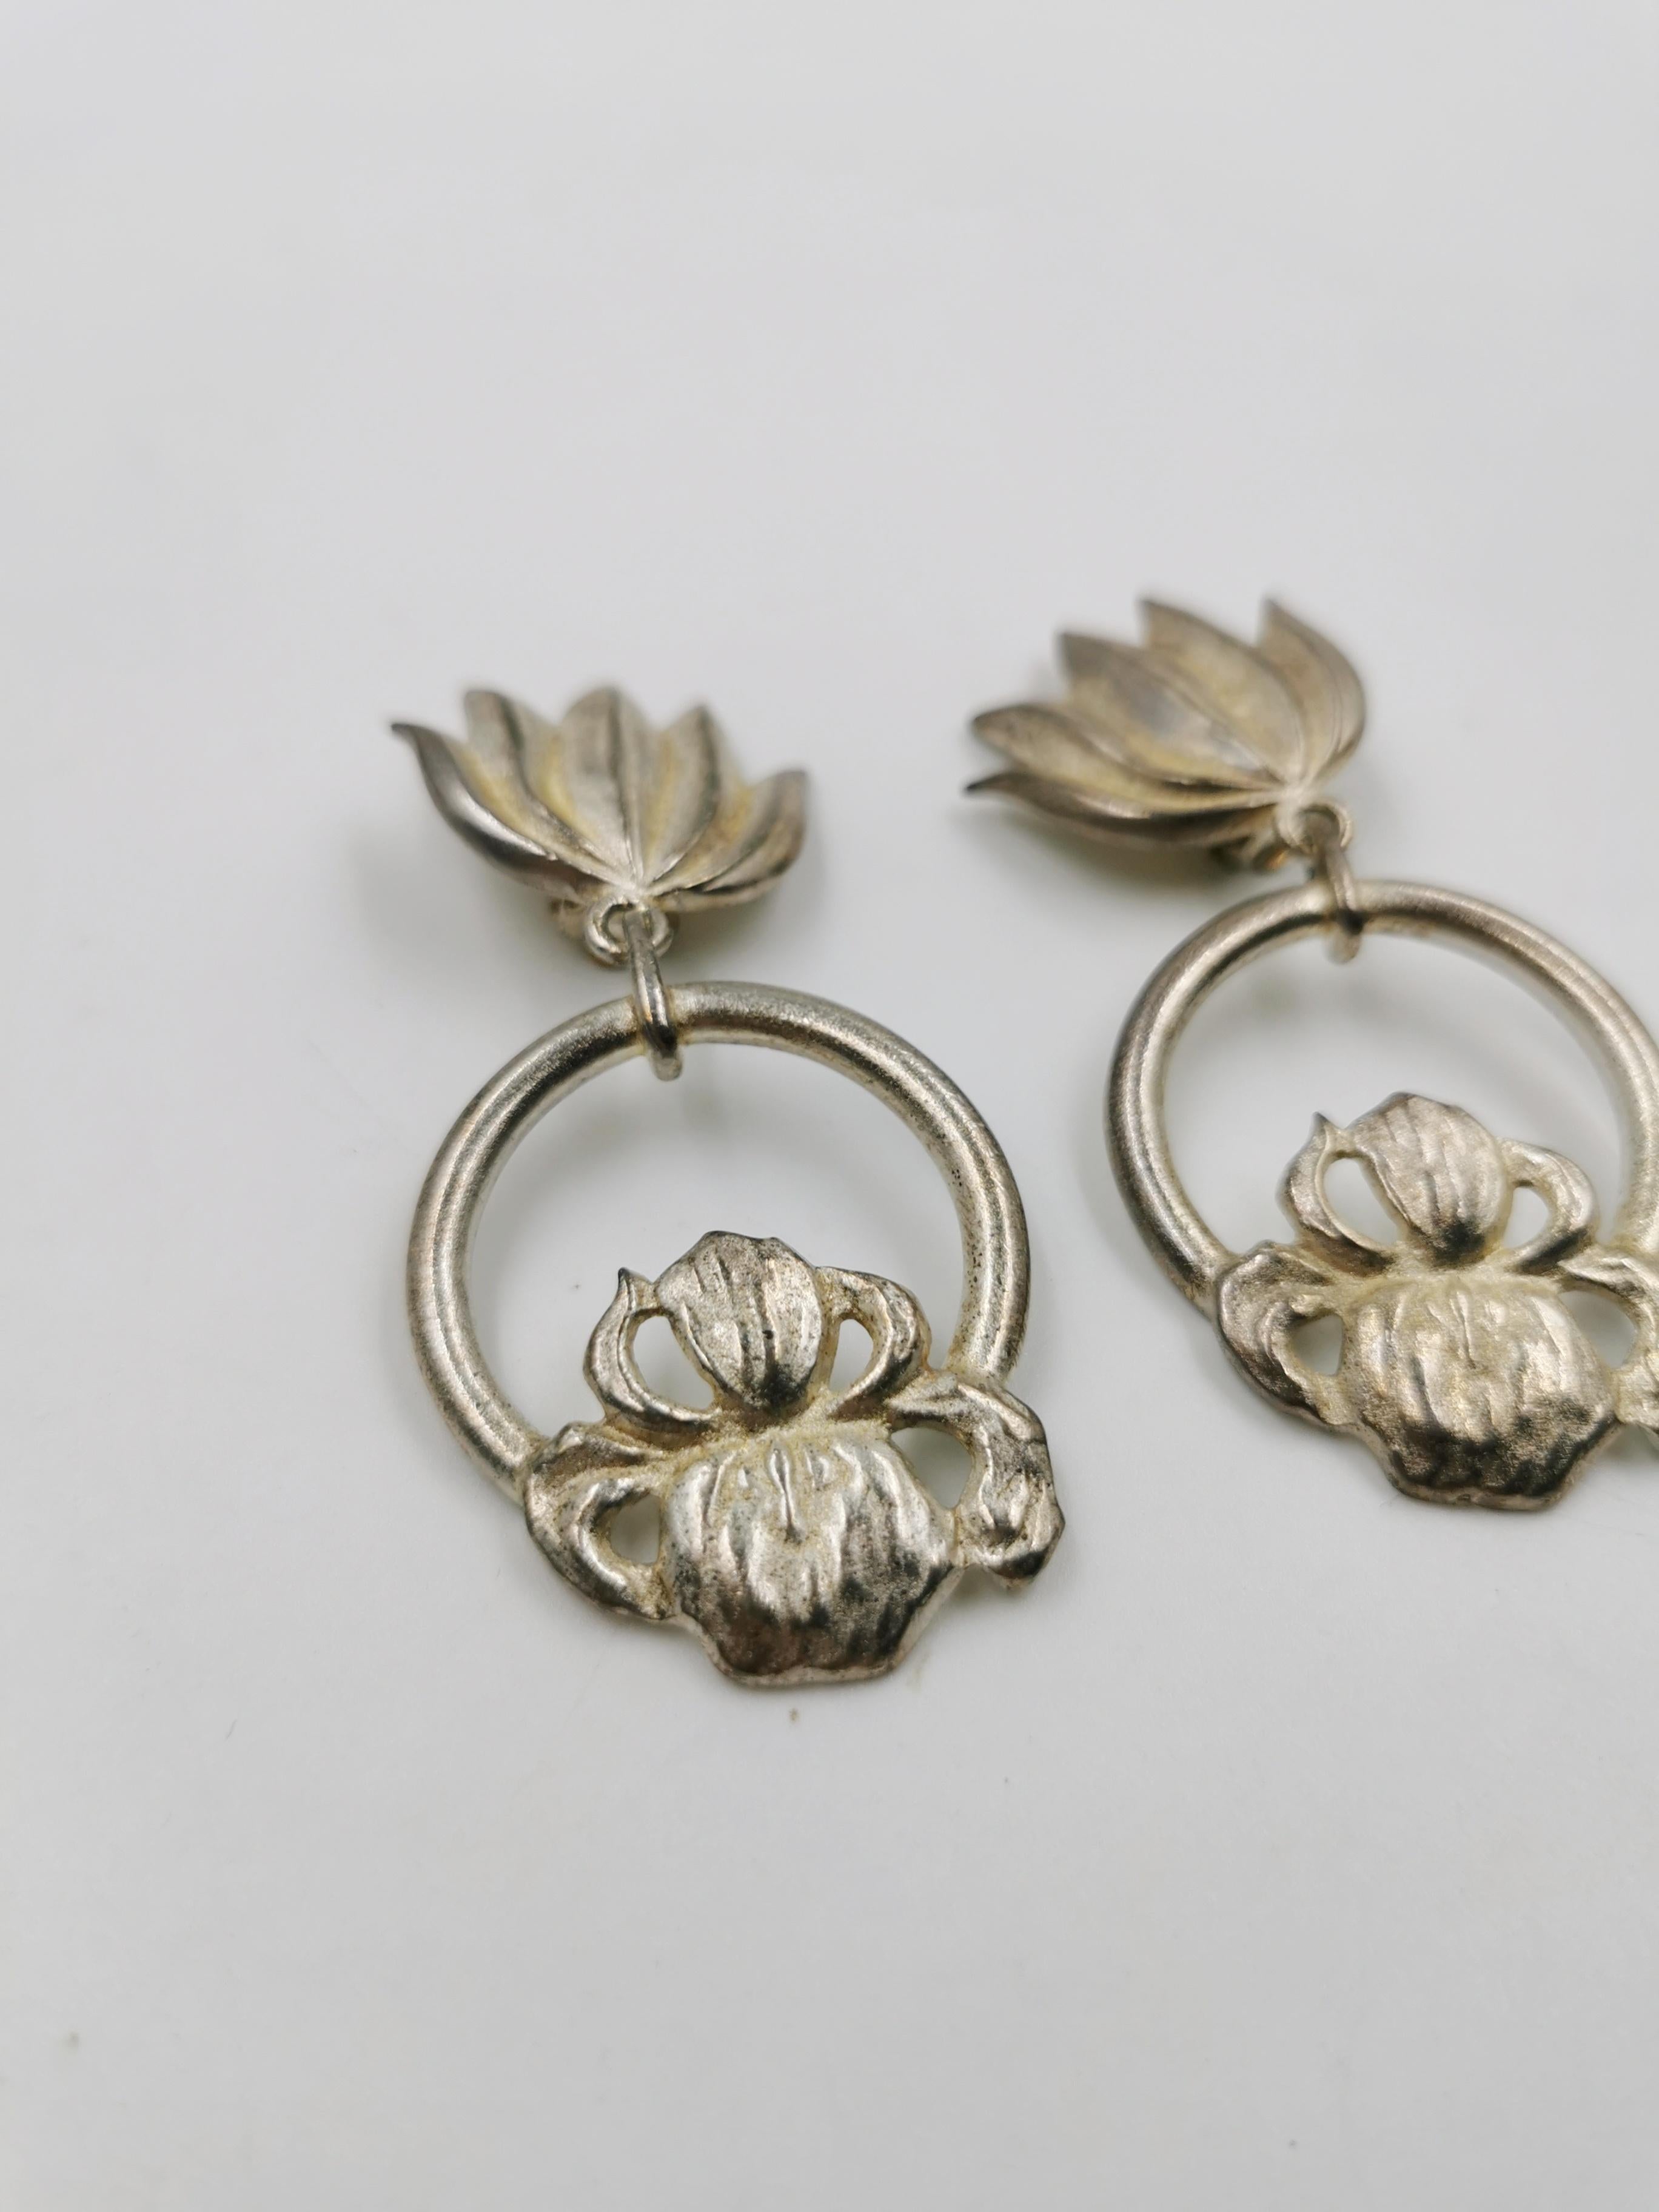 Vintage DVF Matt silver drop earrings, lotus pattern with texture metal details. One off and signed.

Feature
Material: Silver-tone Metal
Condition: Excellent
Colour: Silver
Dimension: 8 cm
Period: 1990-
Place of Origin: France